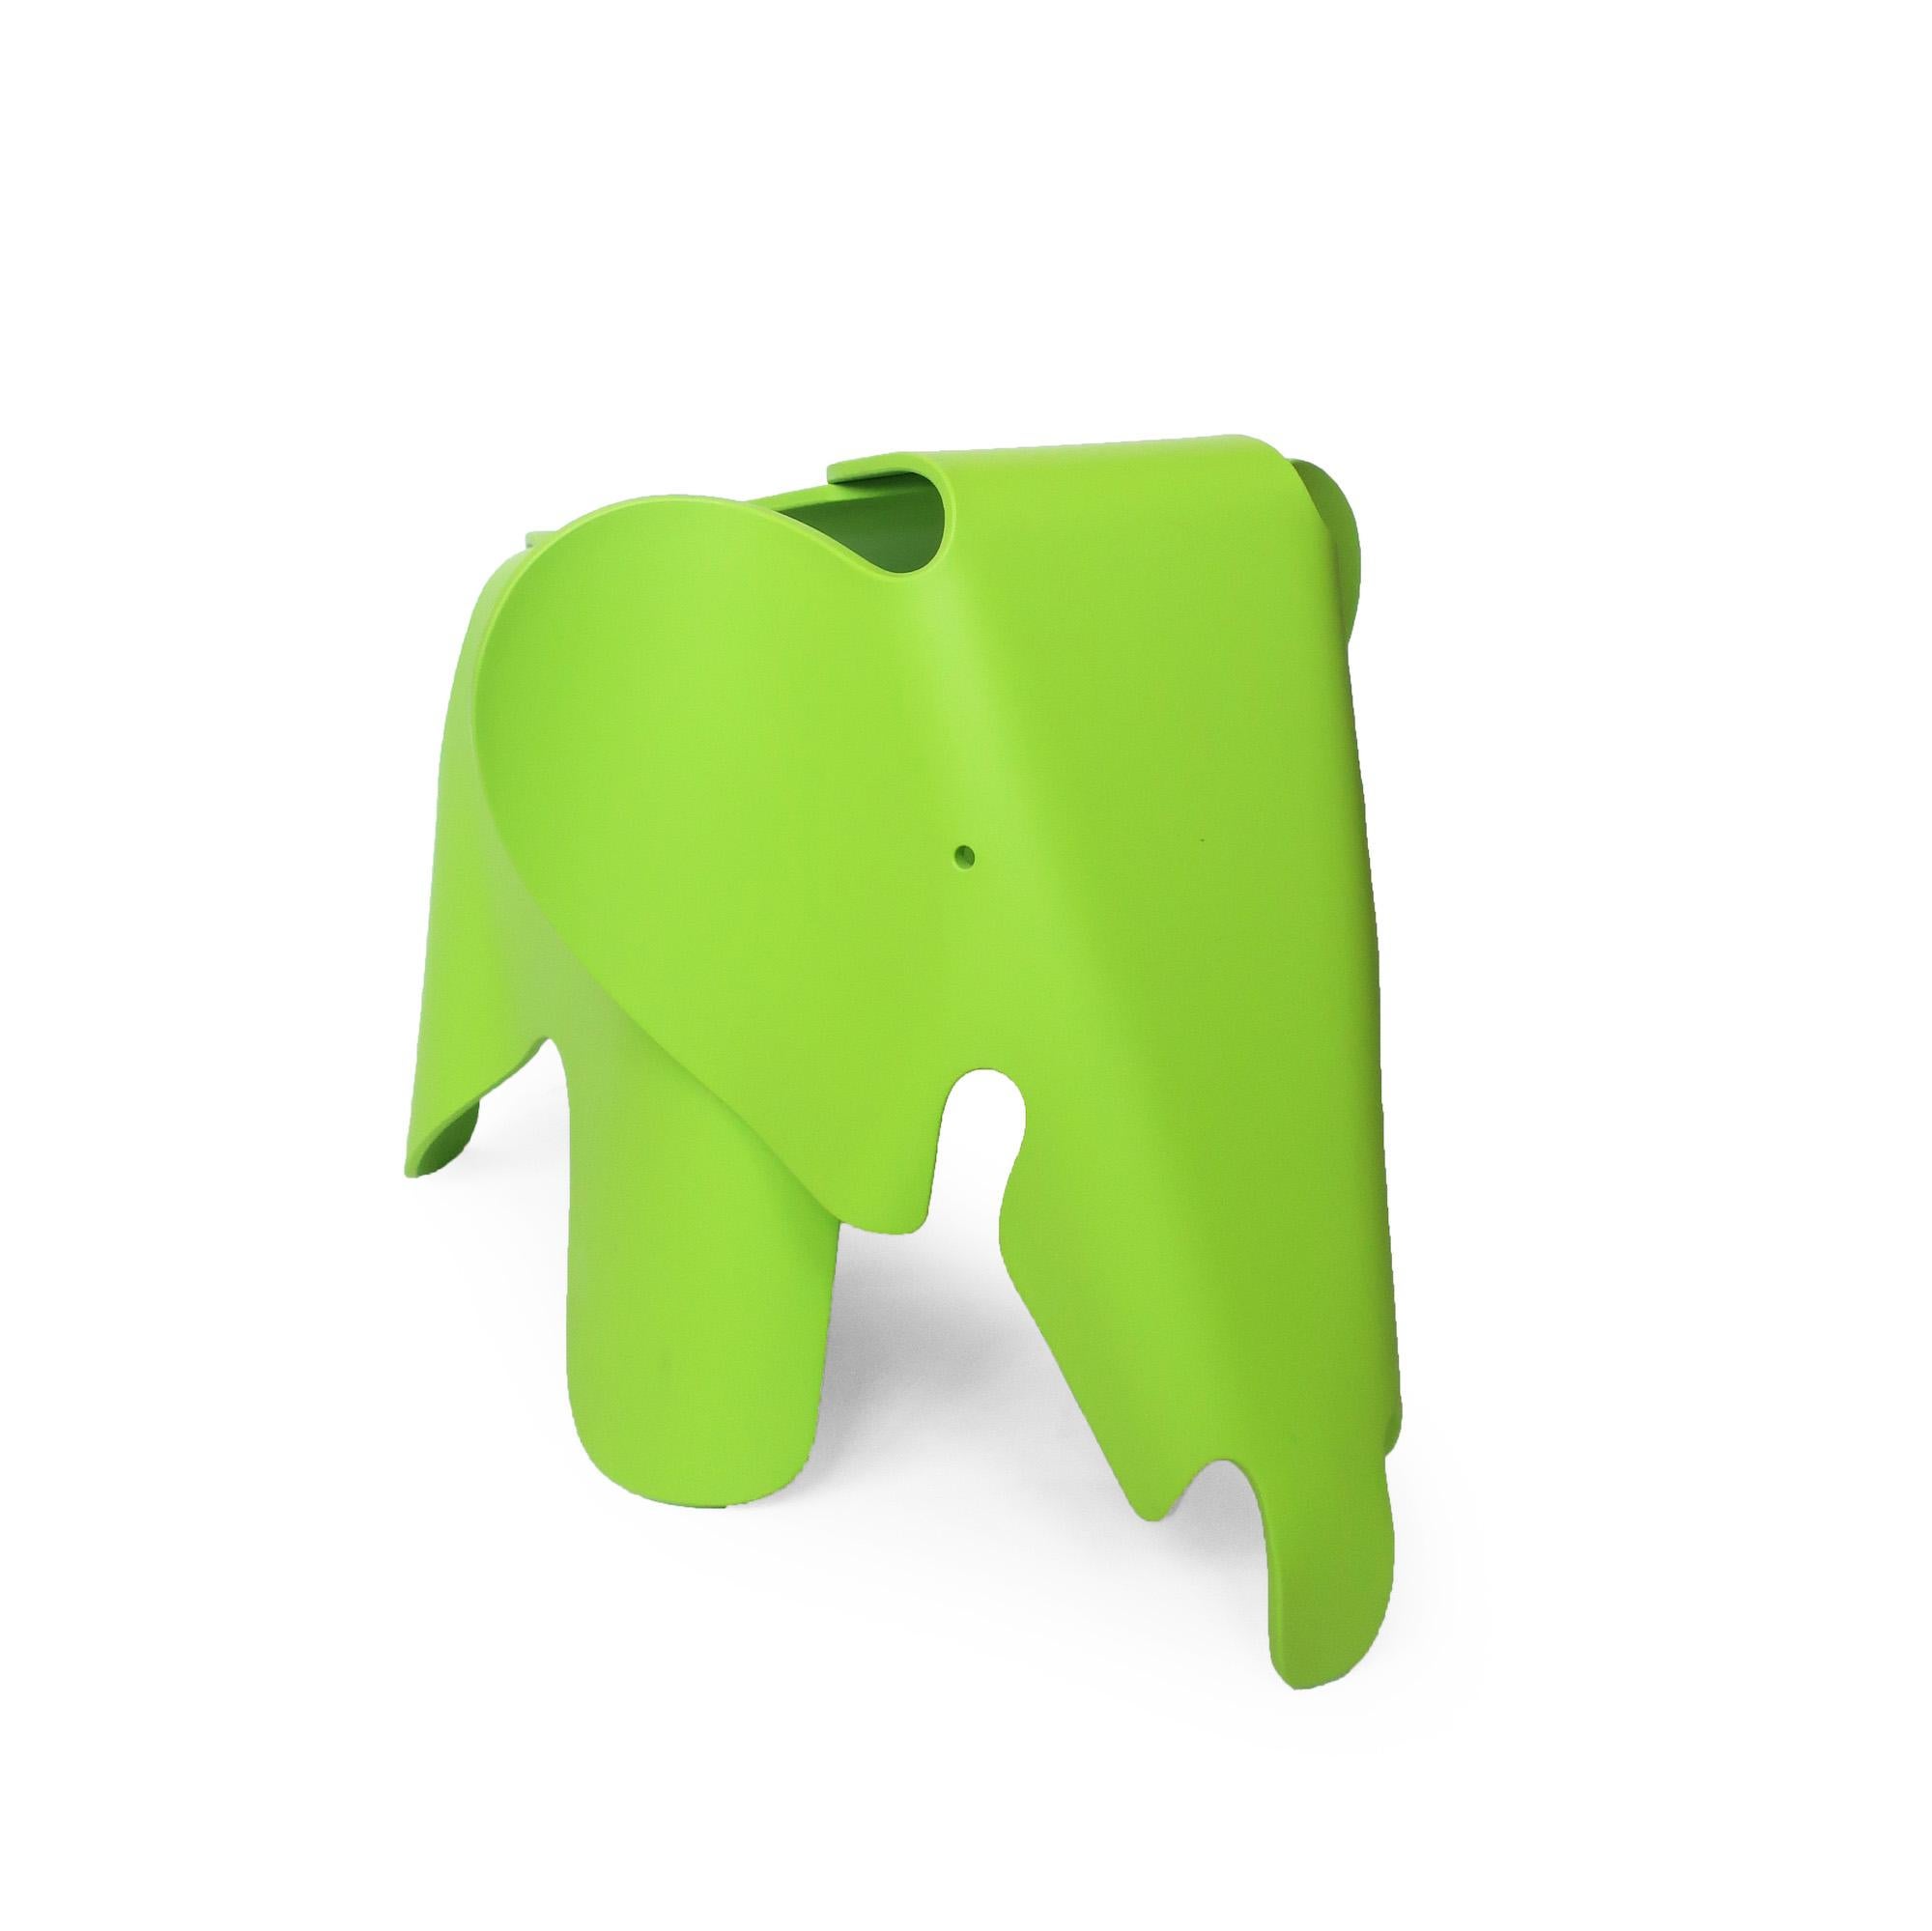 Charles and Ray Eames designed this toy elephant in 1945 while developing and refining their technique for molding plywood into three-dimensional shapes. It was never mass produced until Vitra launched production of the Eames Elephant for the very